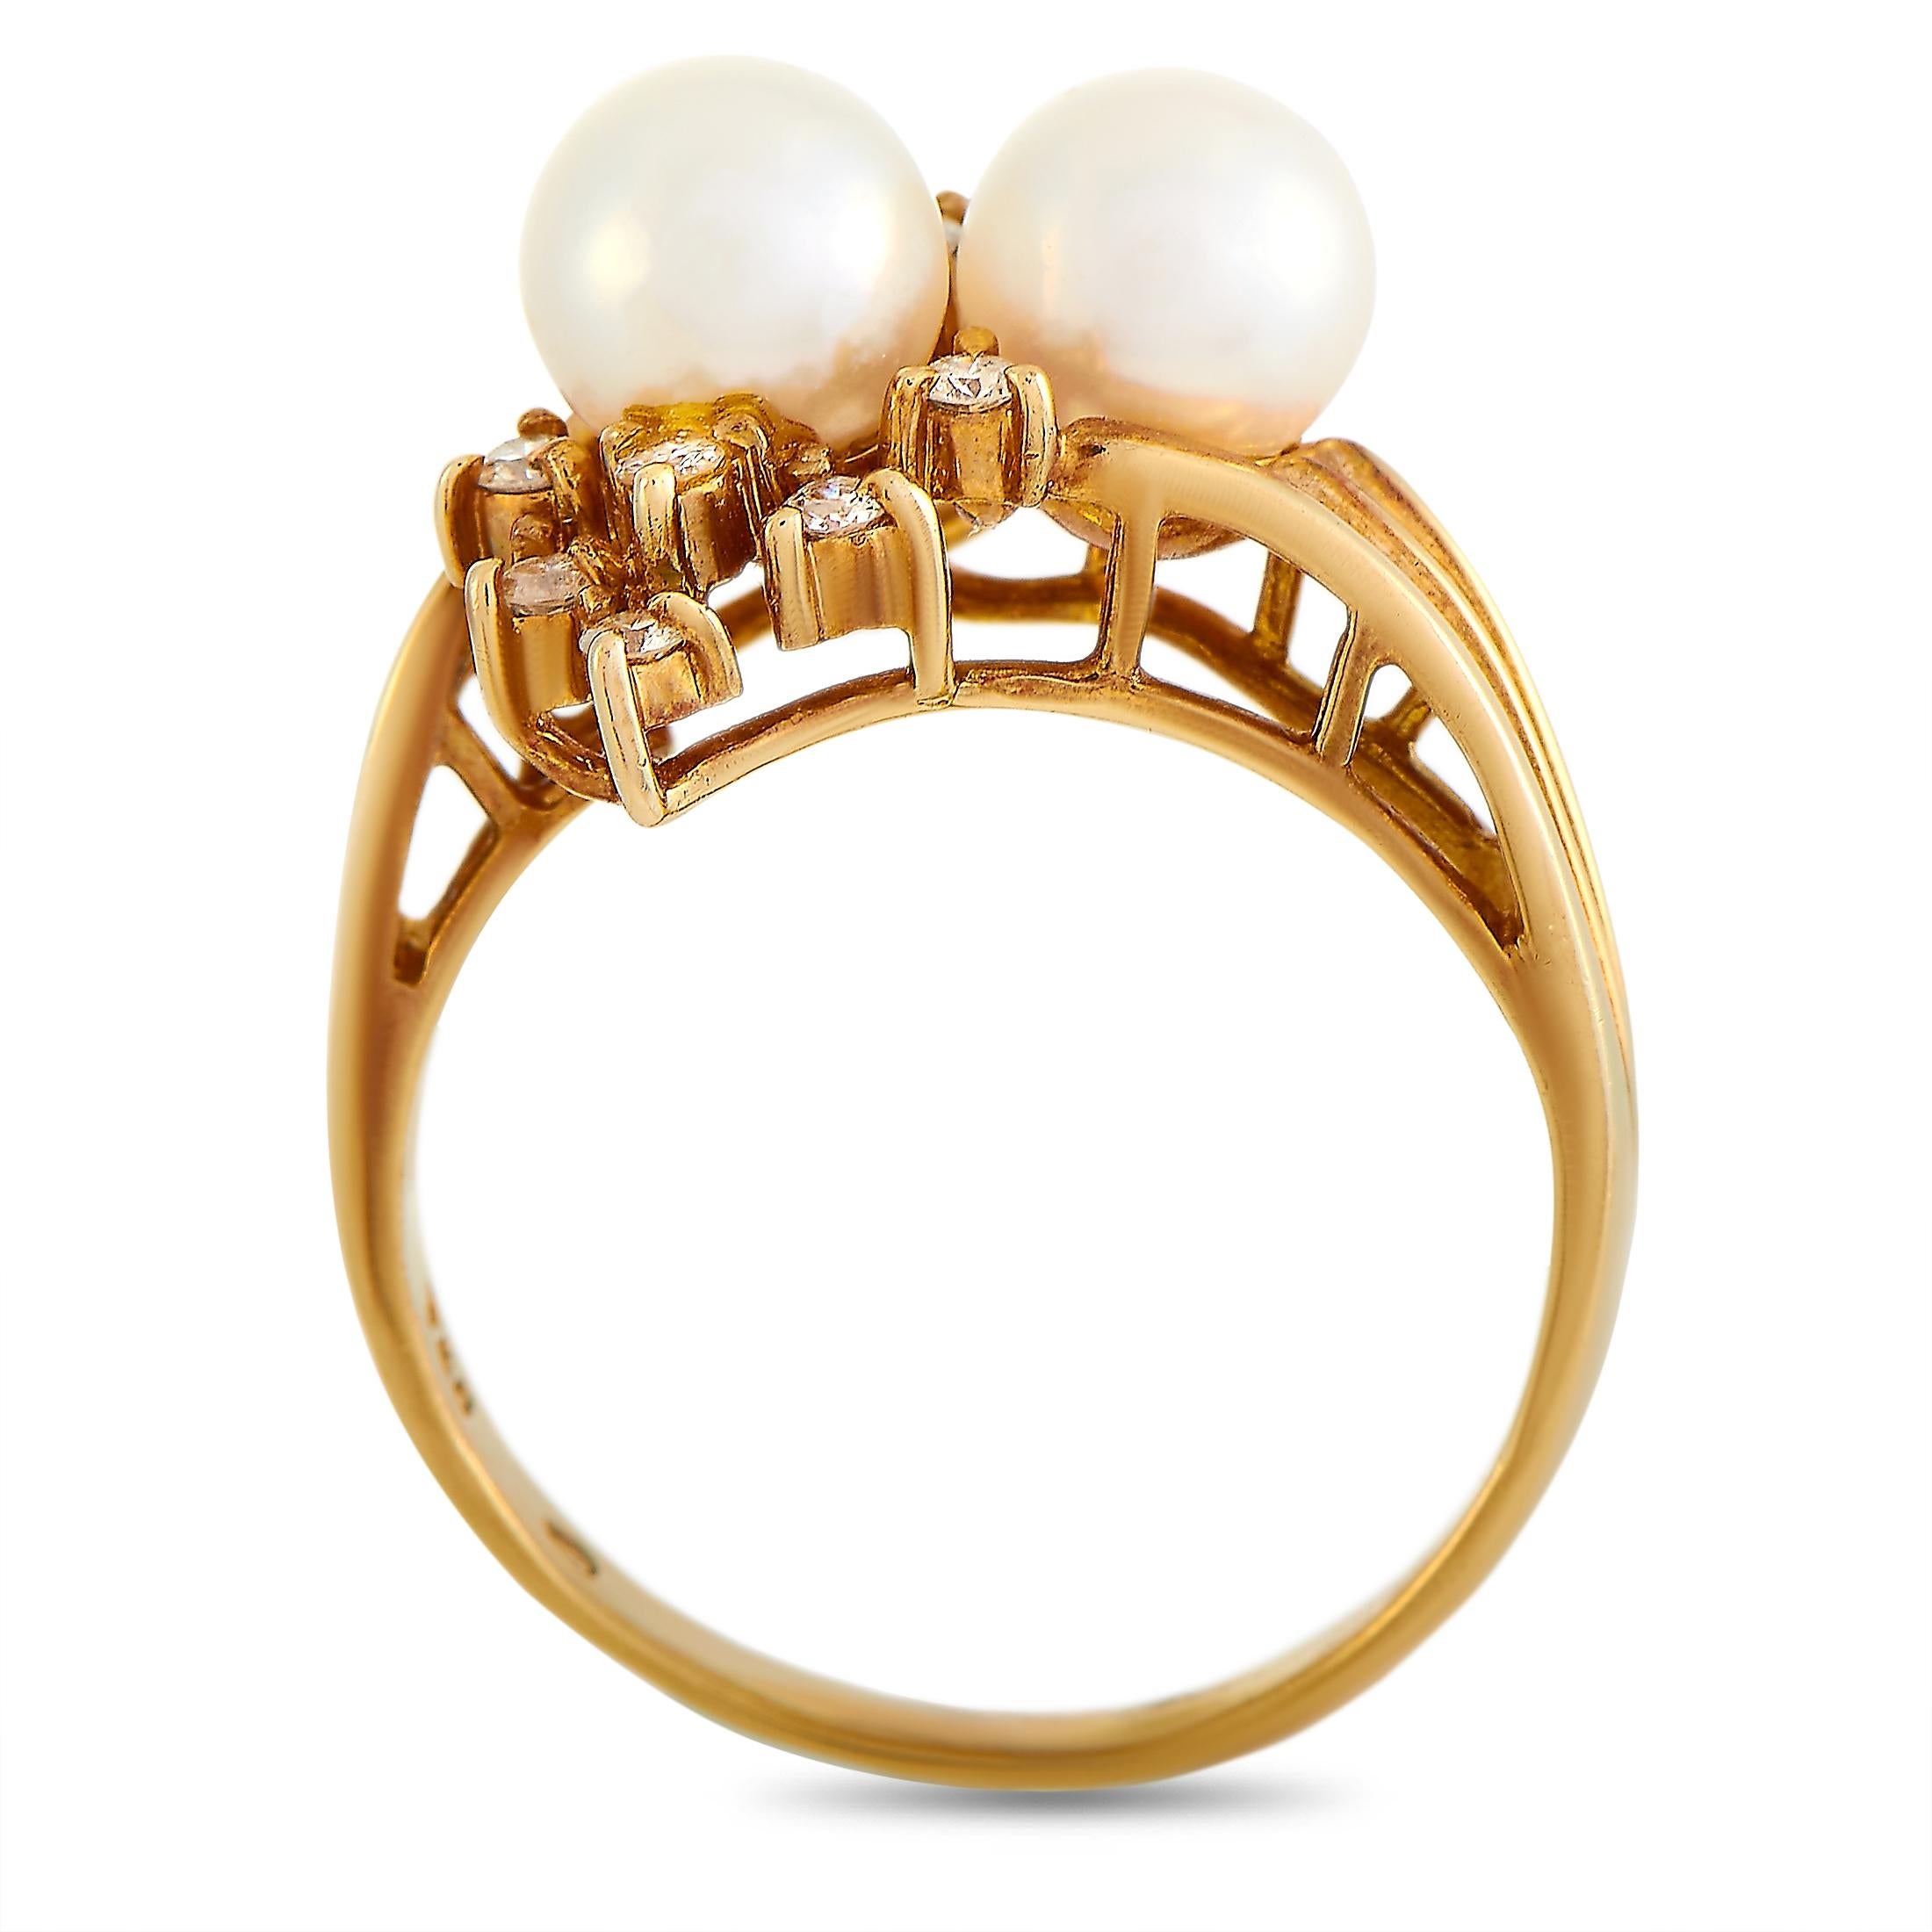 This Tiffany & Co. ring is made of 14K yellow gold and embellished with diamonds and pearls. The ring weighs 3.4 grams and boasts band thickness of 2 mm and top height of 10 mm, while top dimensions measure 15 by 15 mm.
 
 Offered in estate